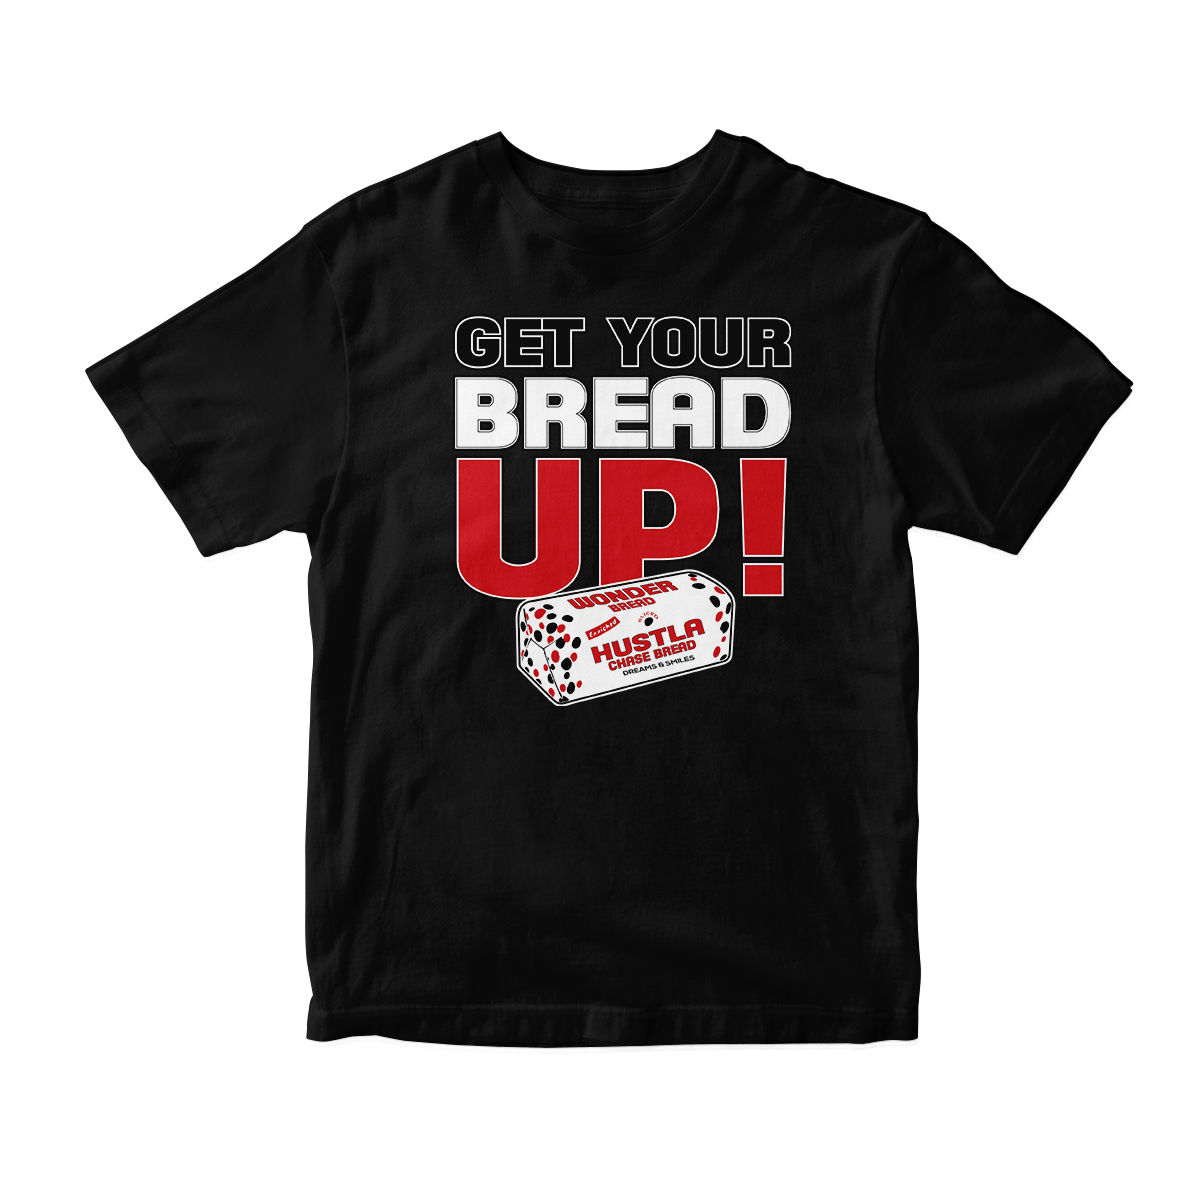 'Get Your Bred Up' in Bred 11 CW Short Sleeve Tee